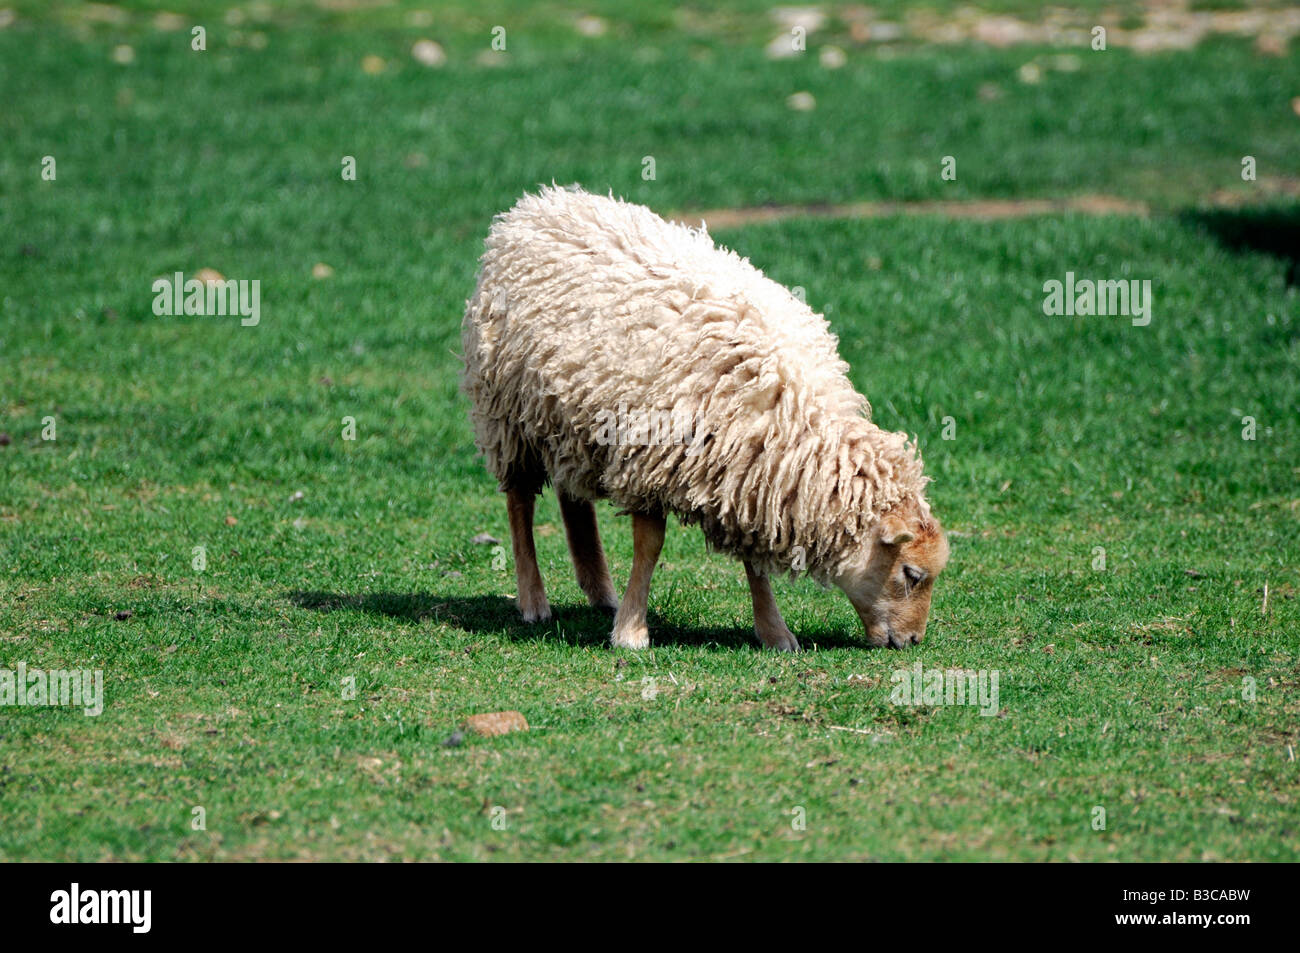 Ushant sheep, the smallest breed of domesticated sheep in the world, from the island of Ushant (Ouessant) of the NW French coast Stock Photo